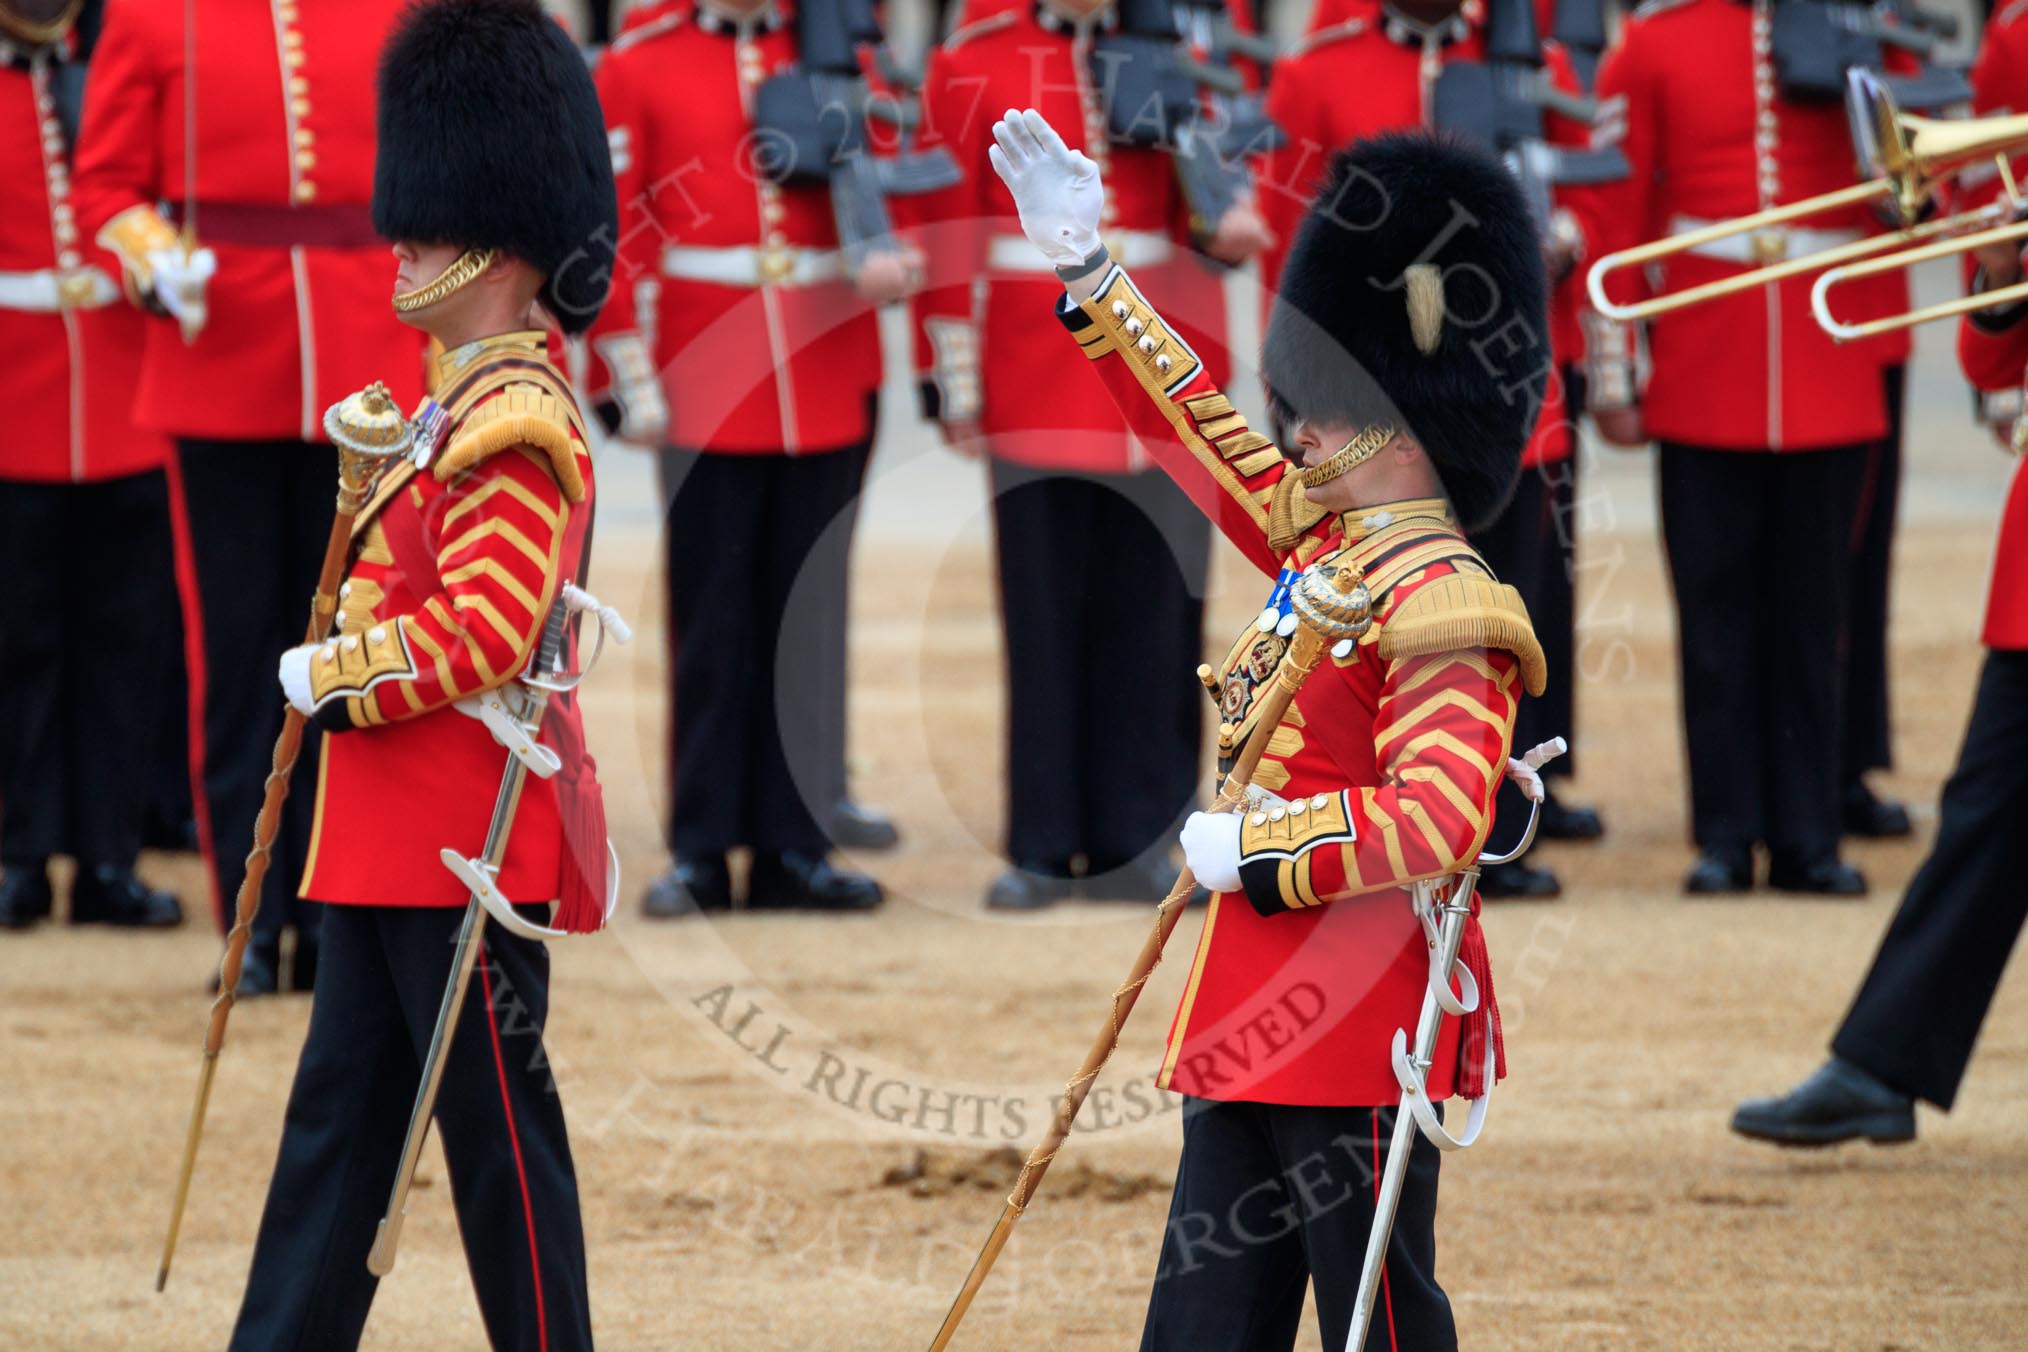 during The Colonel's Review {iptcyear4} (final rehearsal for Trooping the Colour, The Queen's Birthday Parade)  at Horse Guards Parade, Westminster, London, 2 June 2018, 11:23.